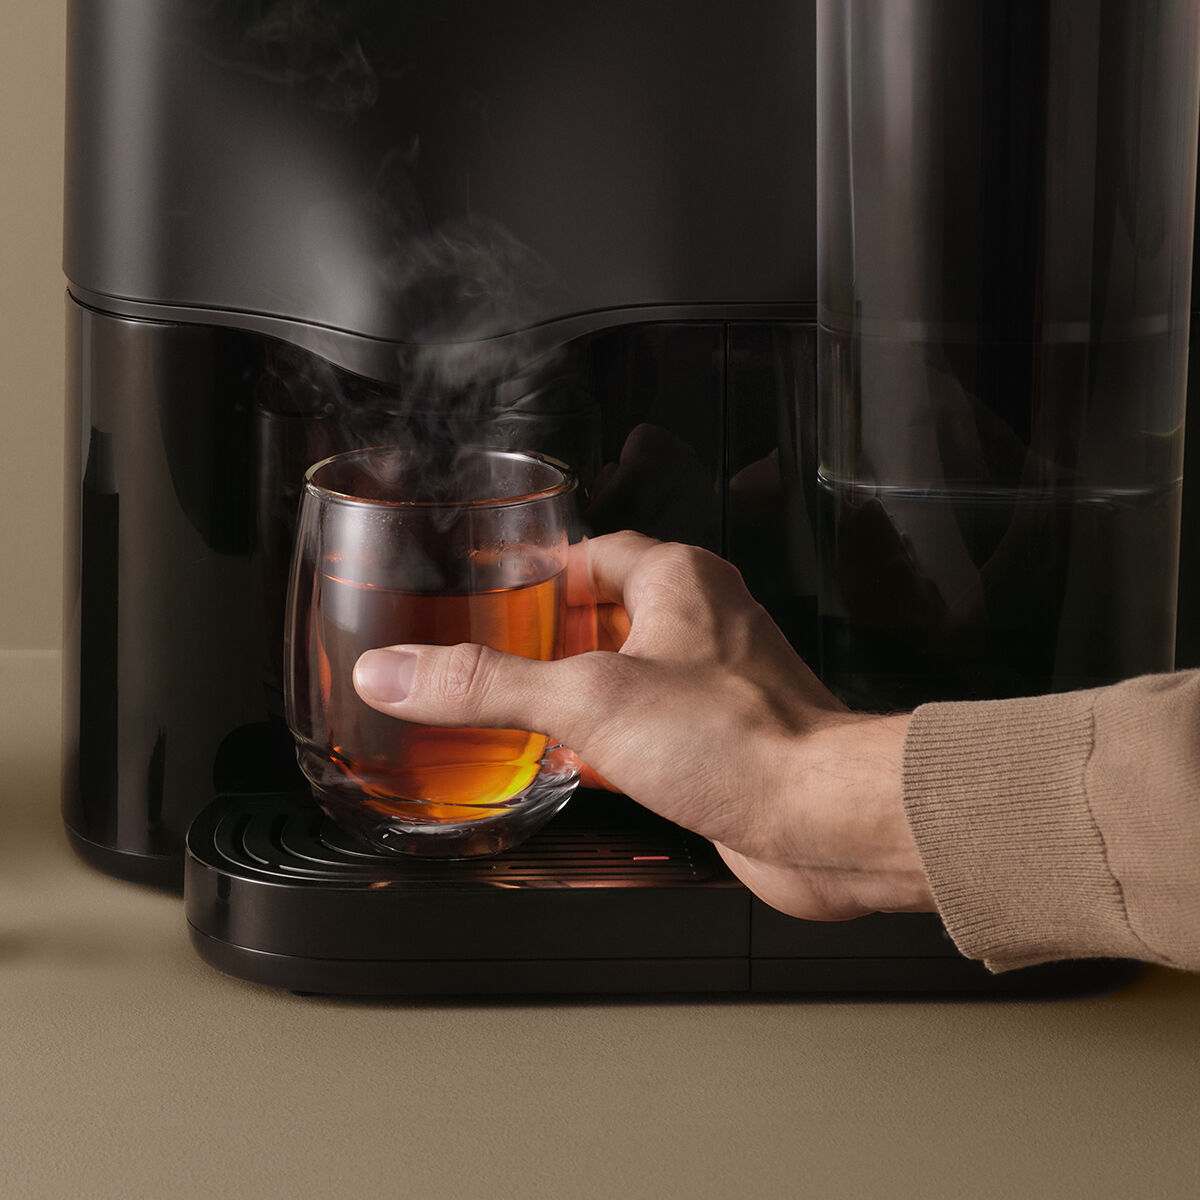 Avoury One tea machine in black with a glass of tea